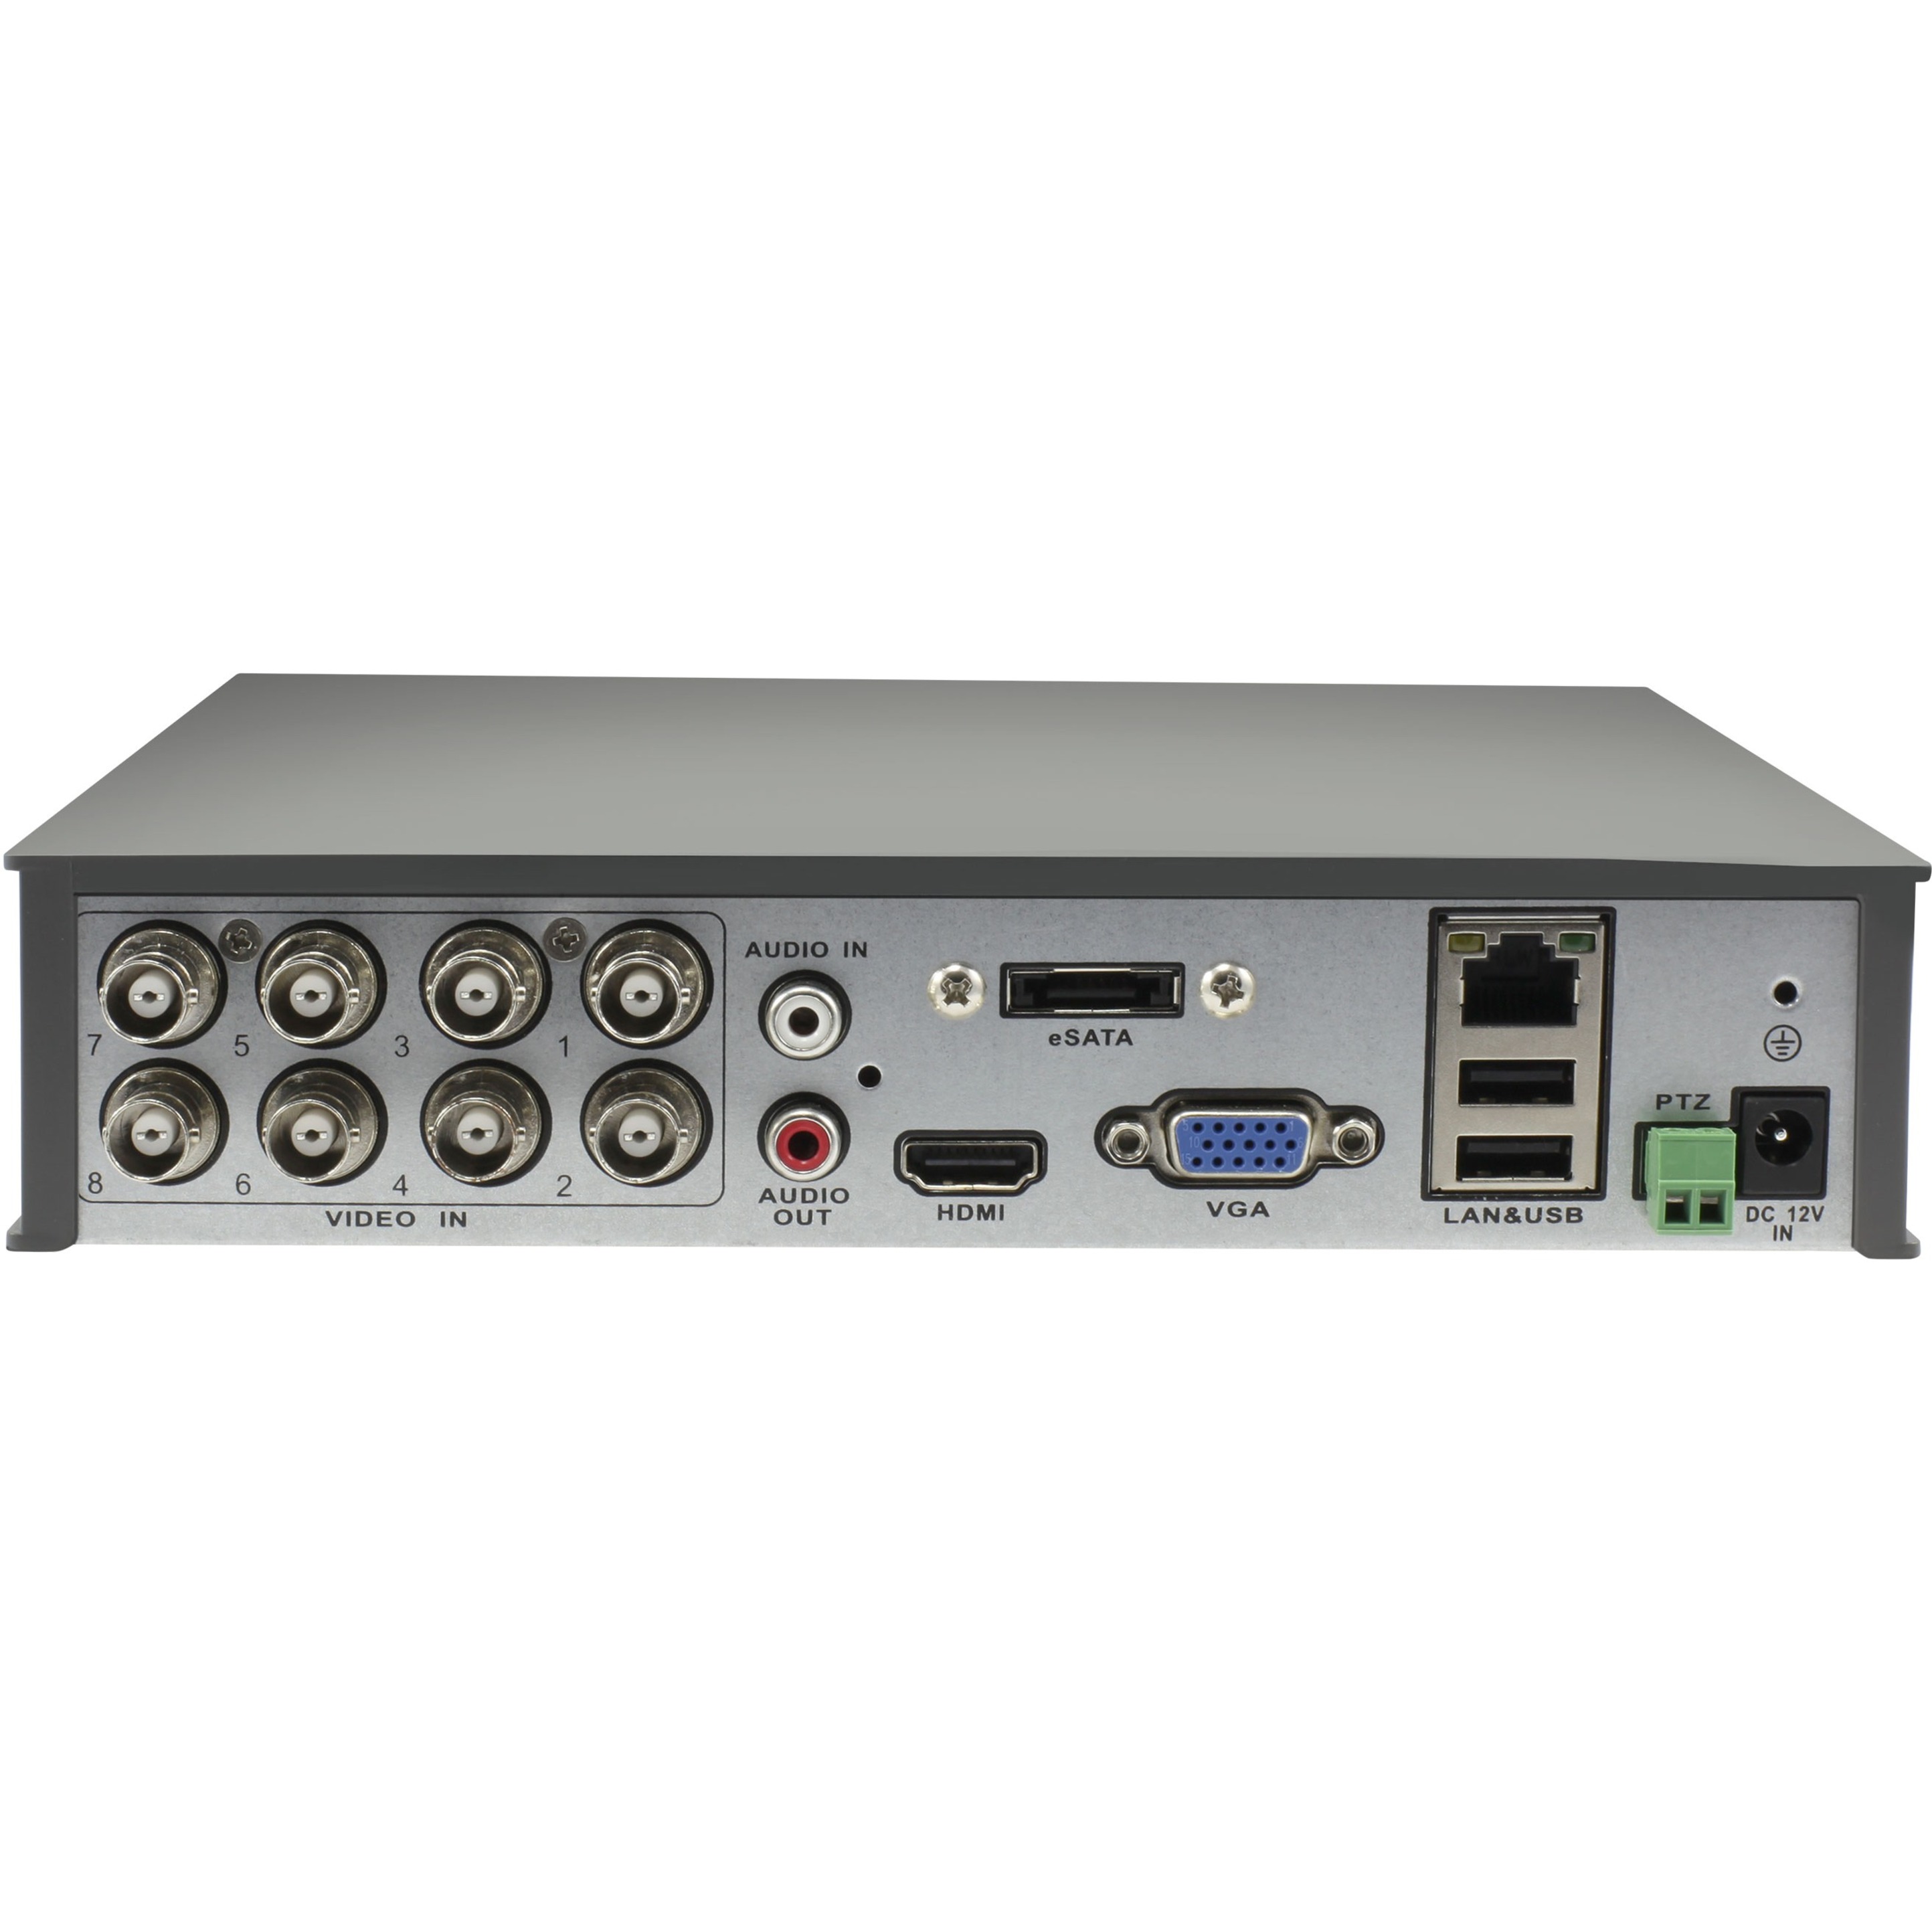 DVR8-4600 AHD 1080A / 2TB 8-CHANNEL DIGITAL VIDEO RECORDER - image 2 of 3